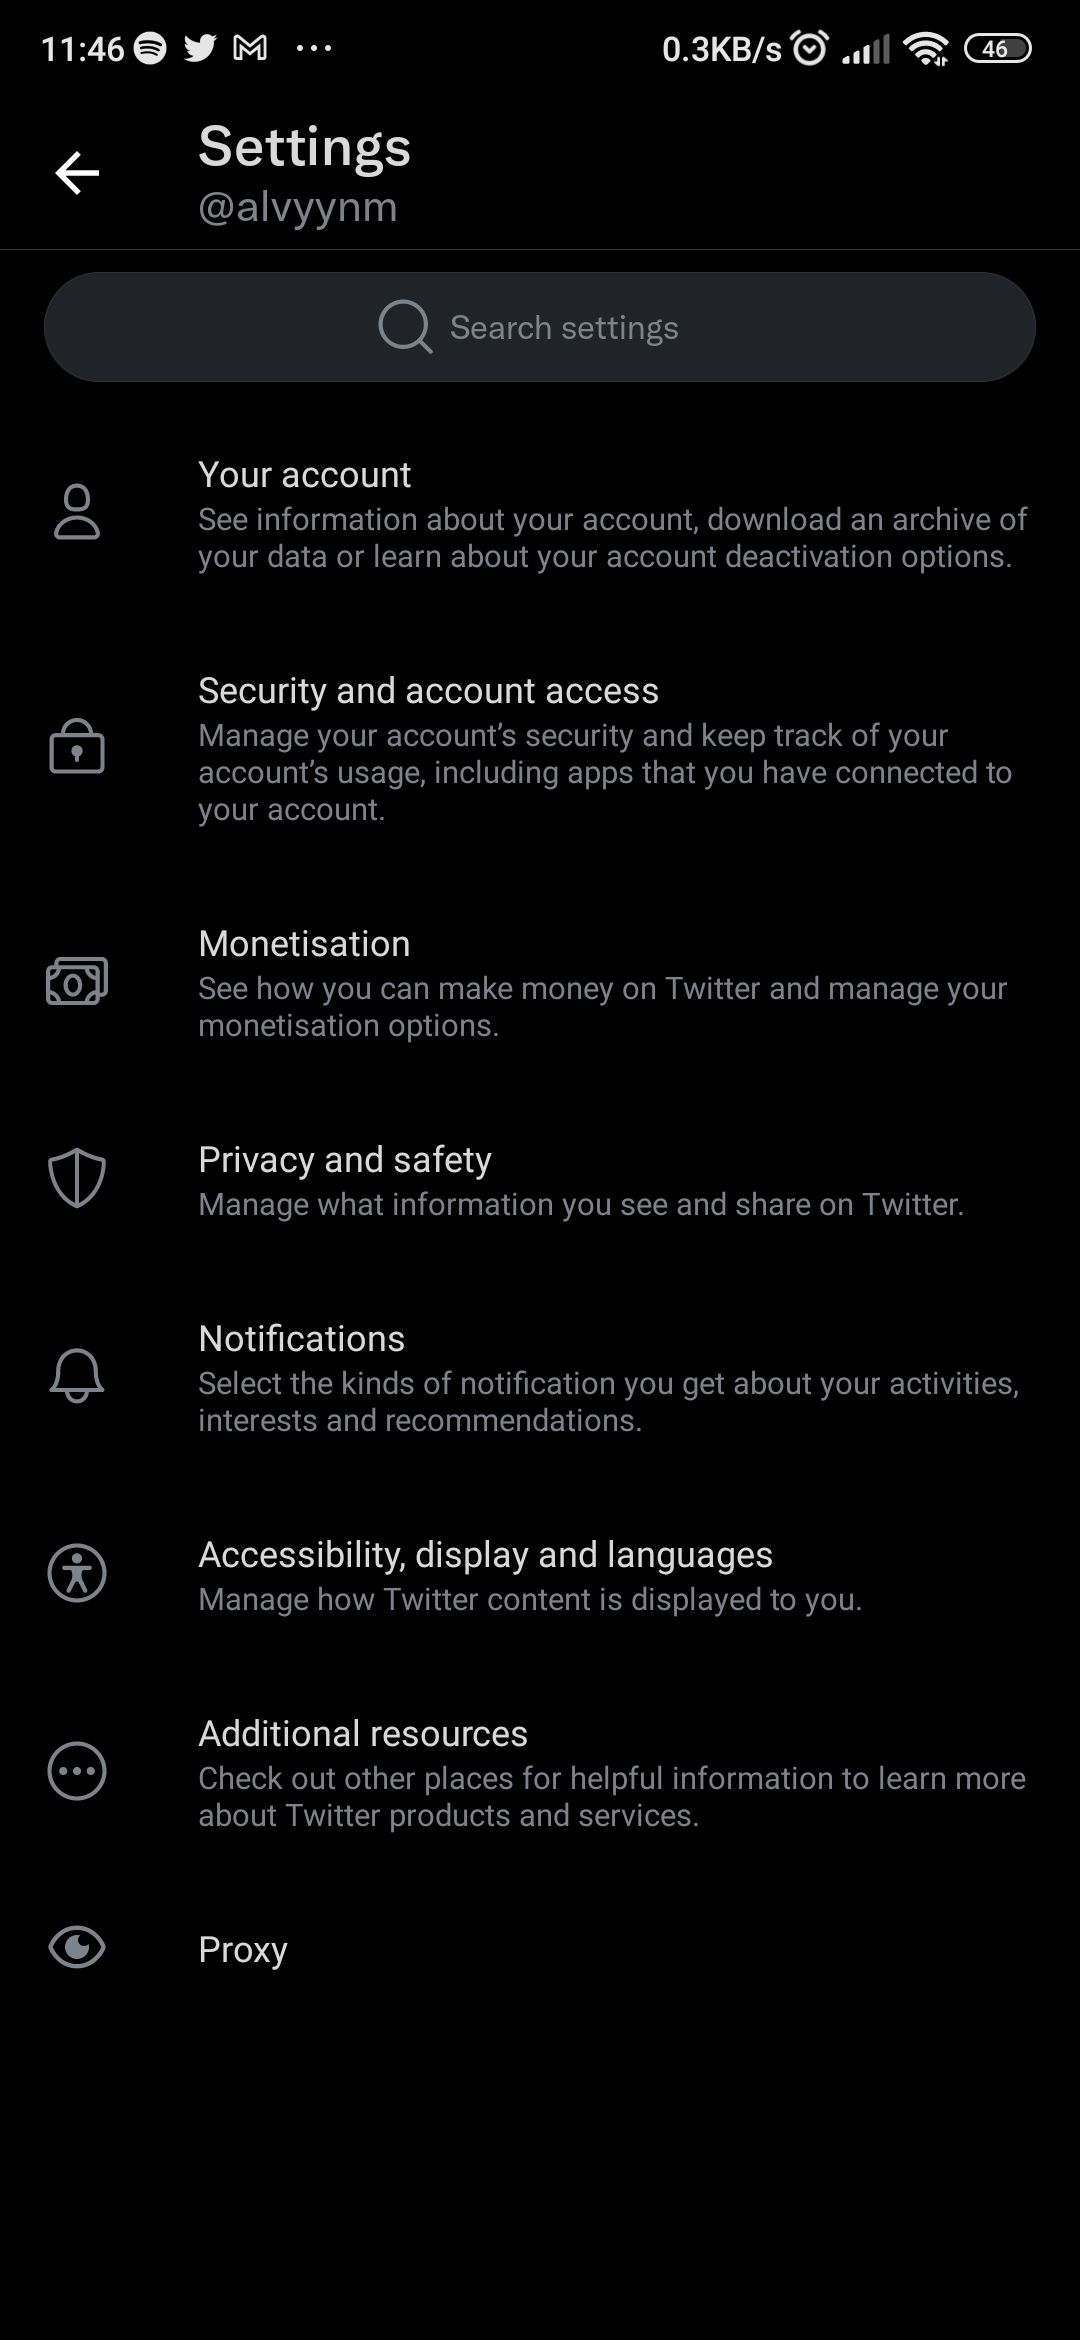 A screenshot of Twitter Settings page on mobile